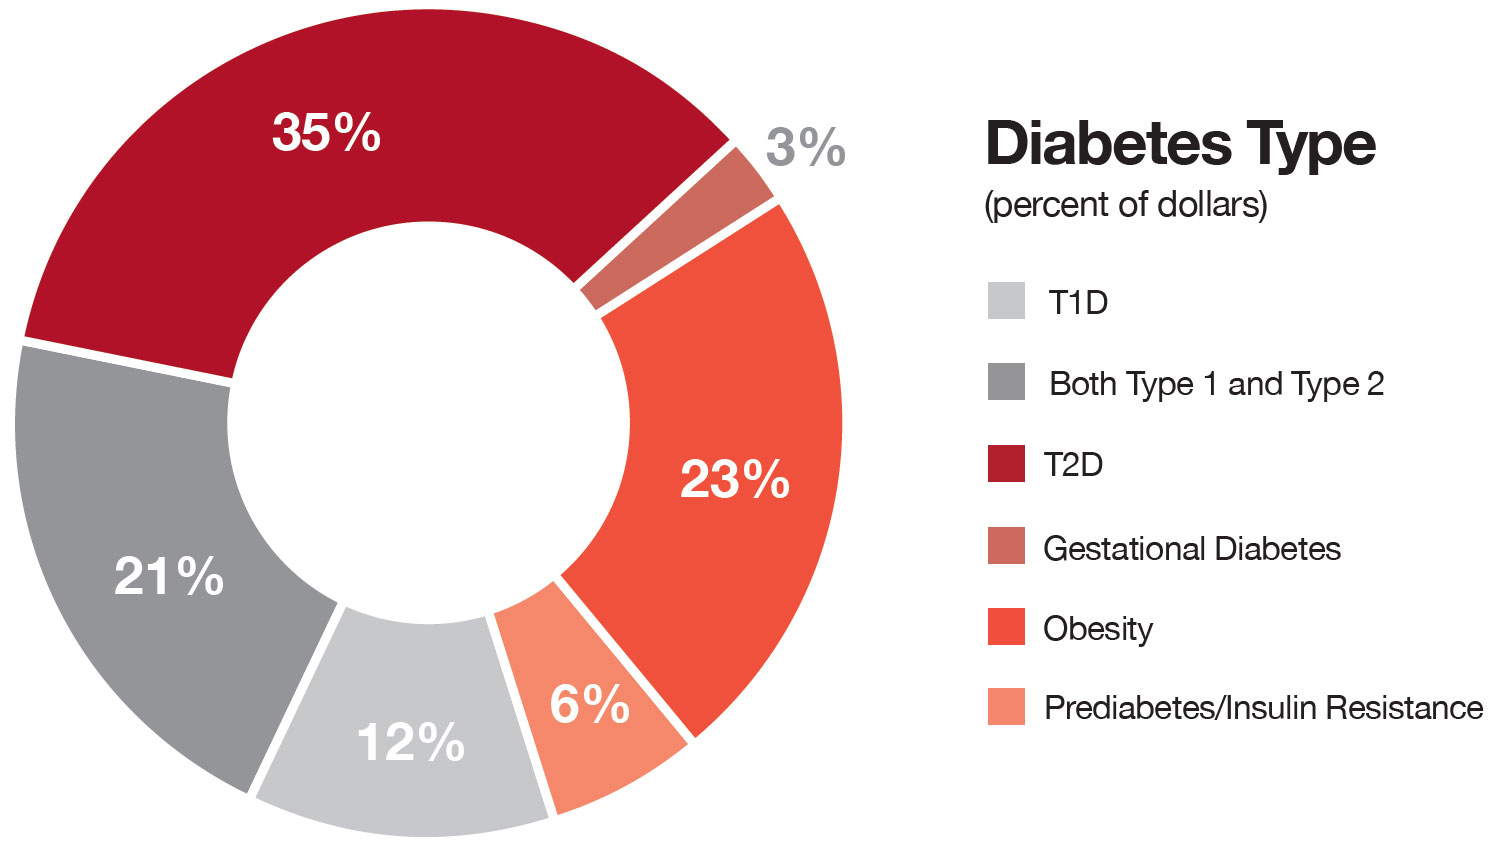 Pie chart showing 2020 research funding percentages according to type of diabetes